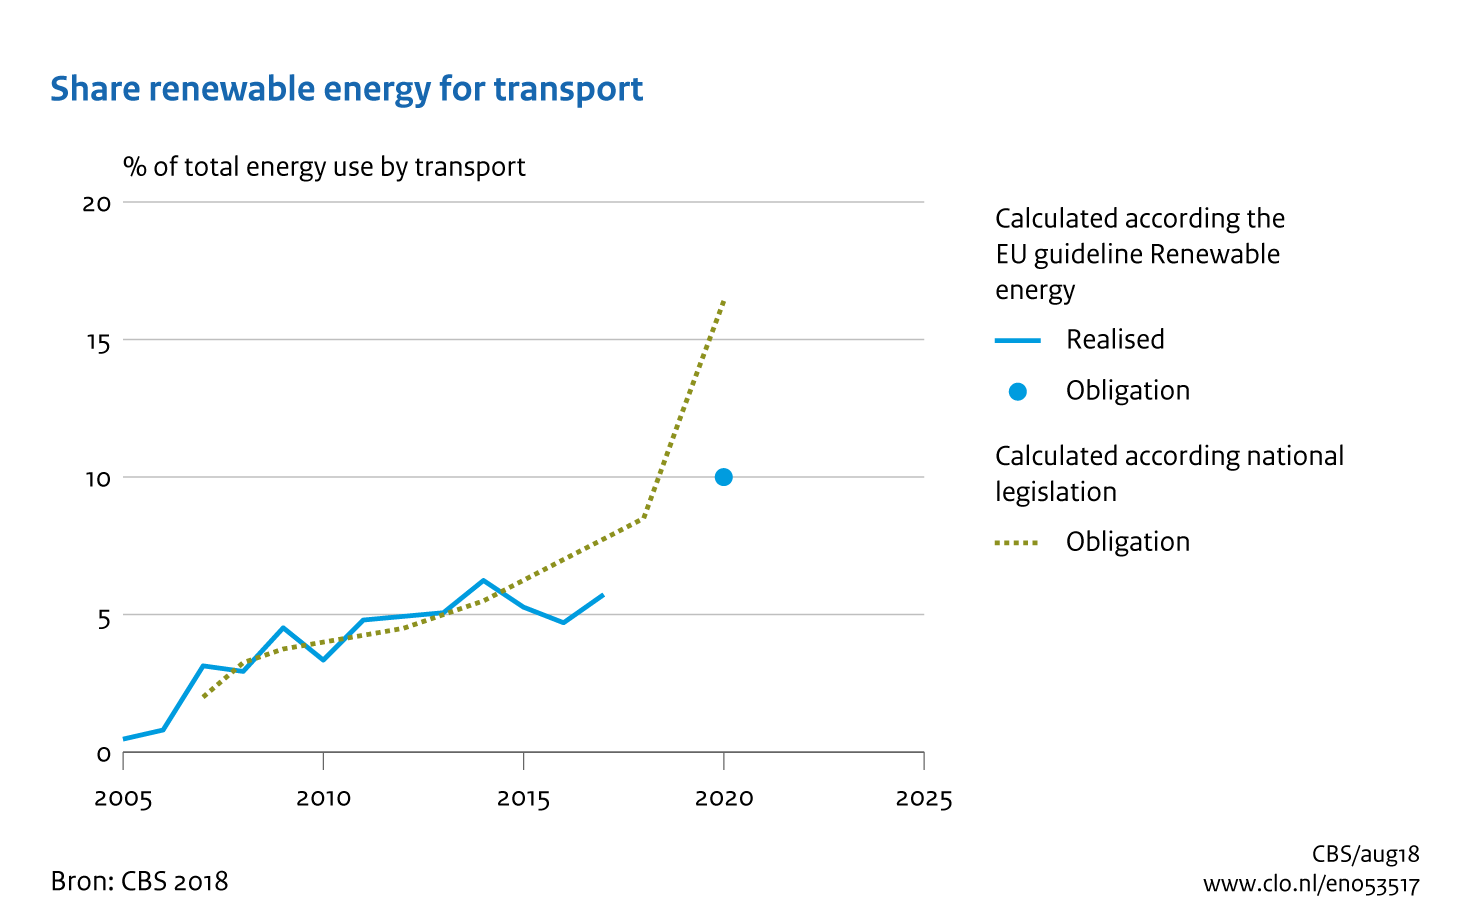 Image Share renewable energy for transport. The image is further explained in the text.